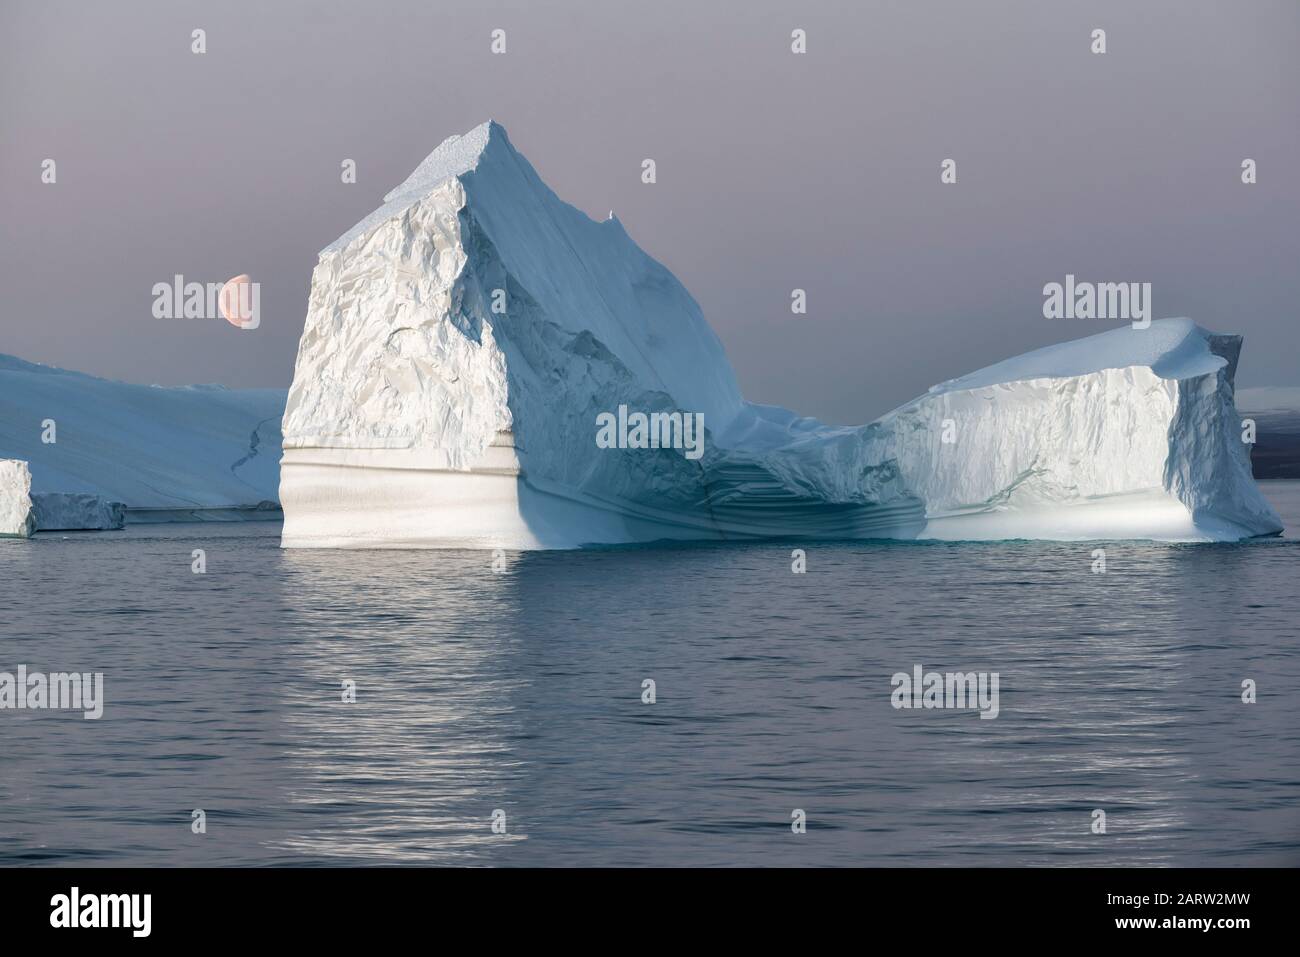 Huge floating iceberg in a fjord at sunset with moon on the left. Scoresby Sund, Kangertittivaq, Greenland, Denmark Stock Photo